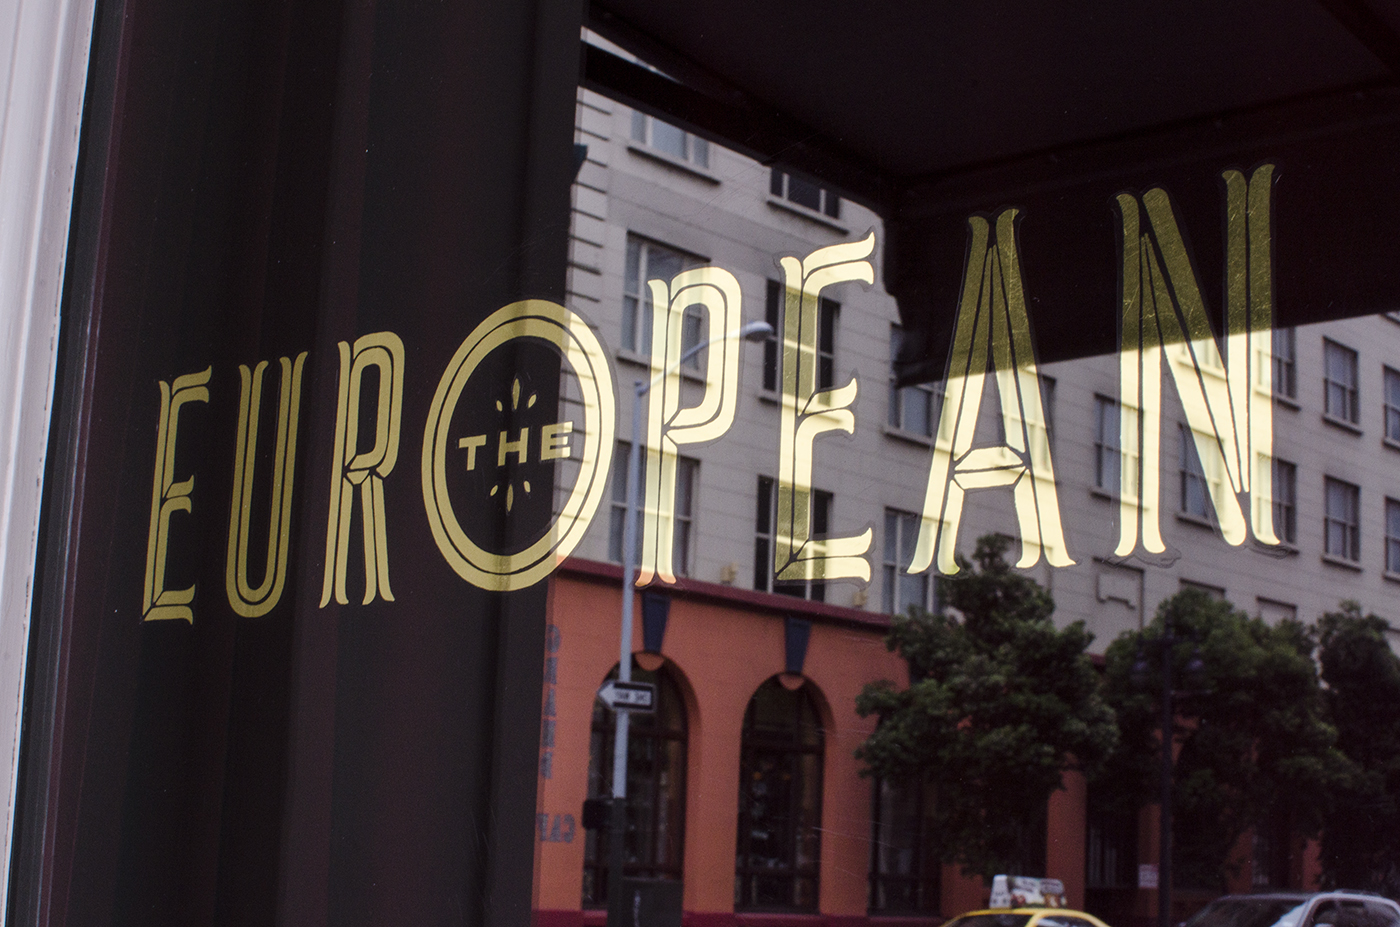 The European gold on glass sign